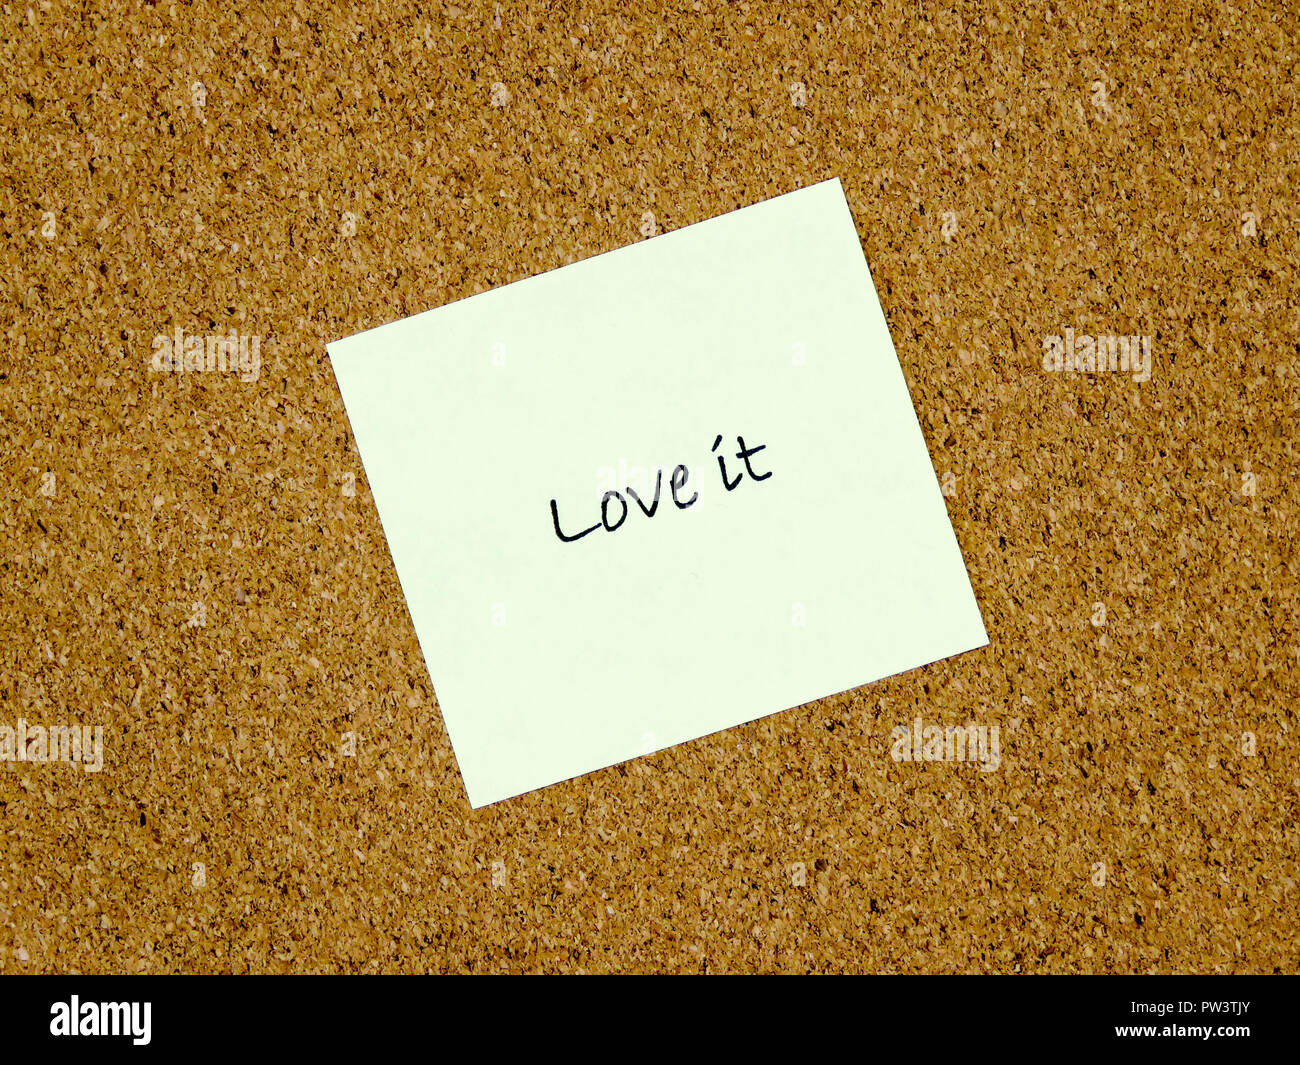 A yellow sticky note with love it written on it on a cork board background Stock Photo